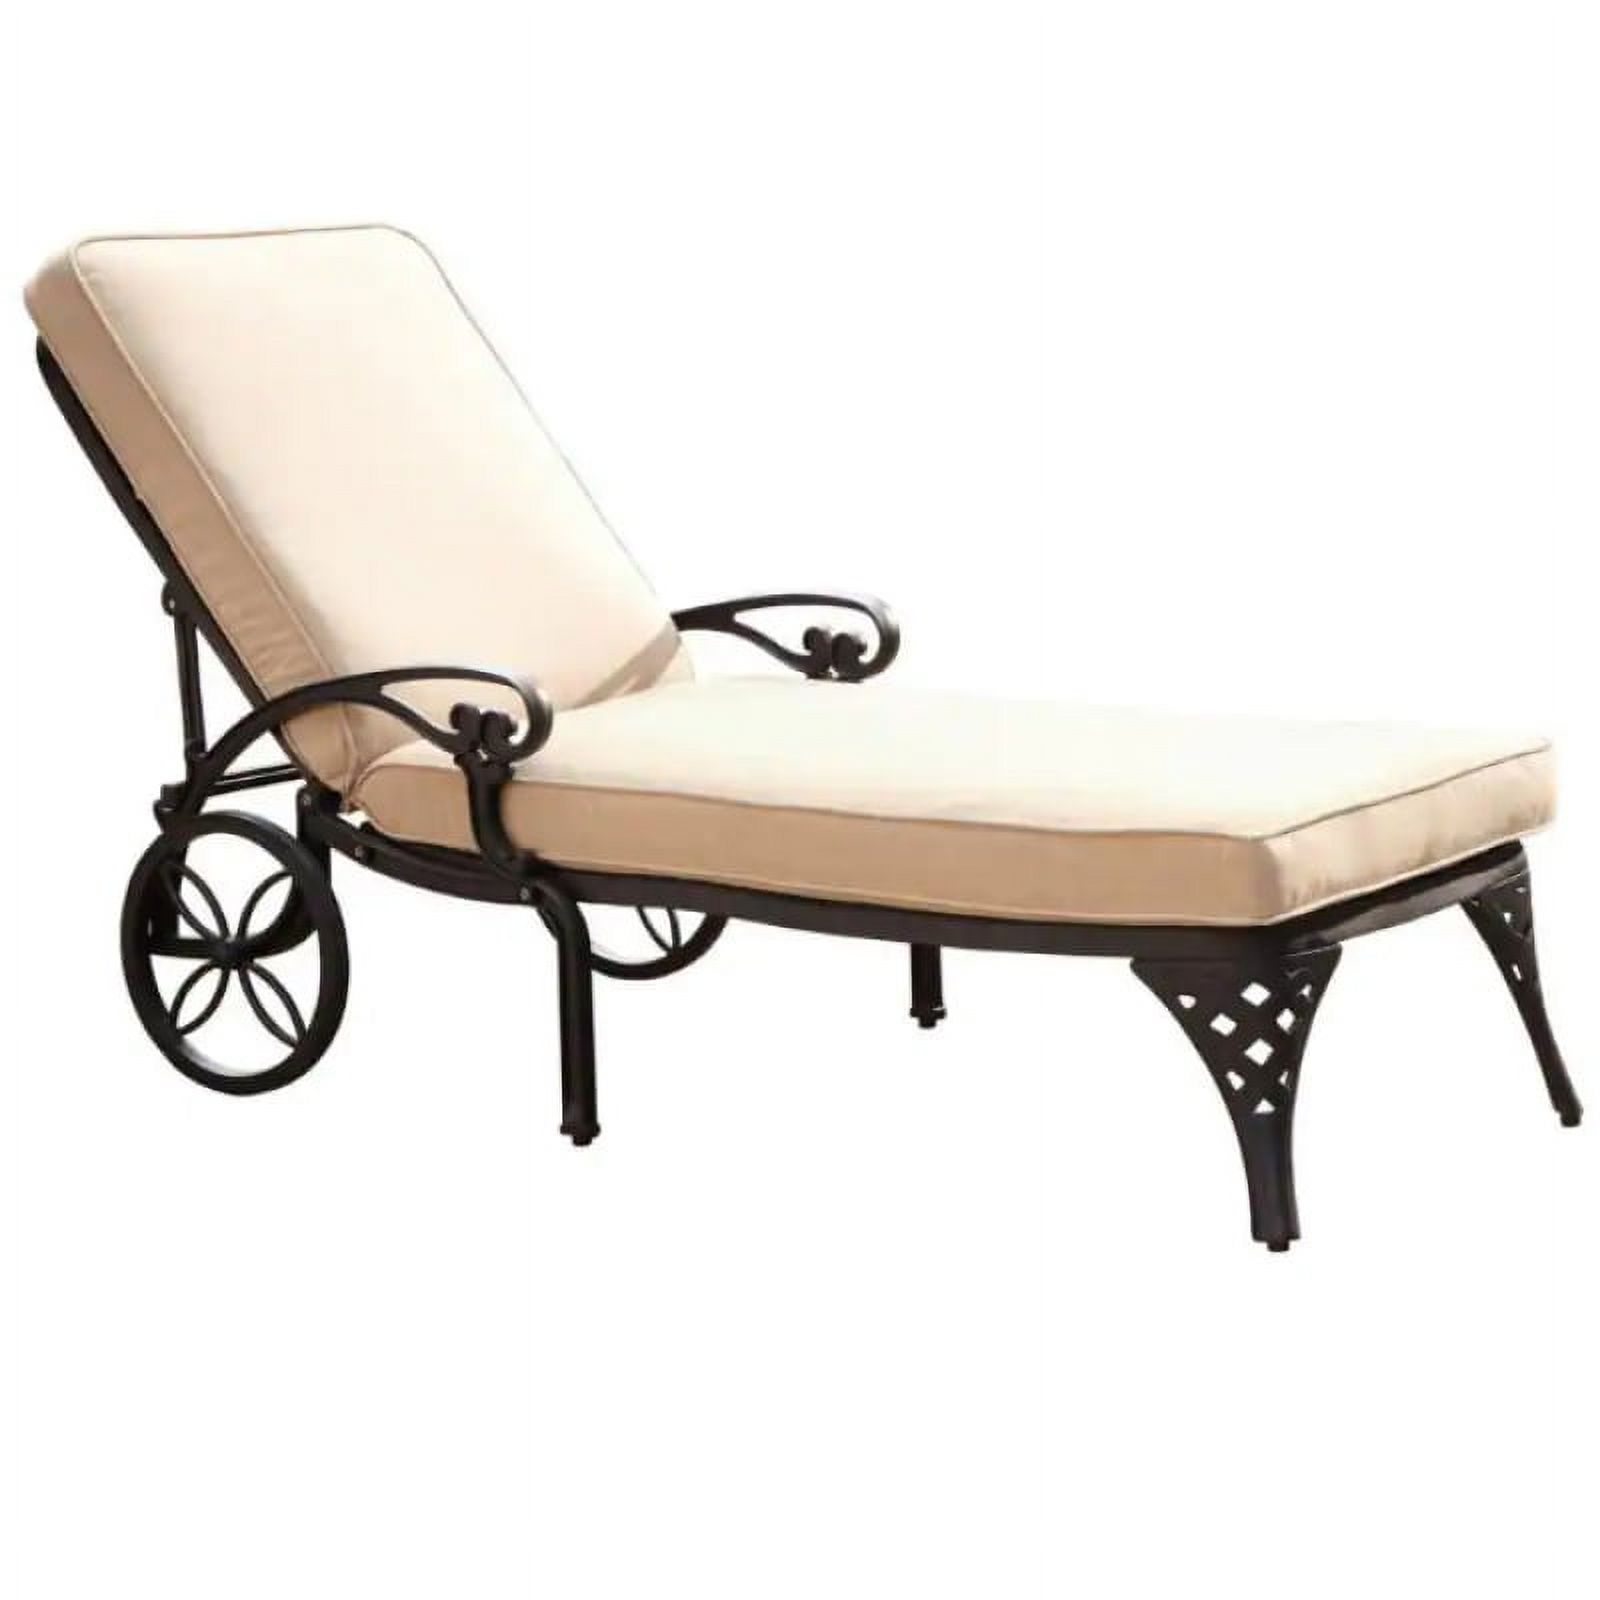 Pemberly Row Traditional Aluminum Chaise Lounge with Cushion - image 1 of 4